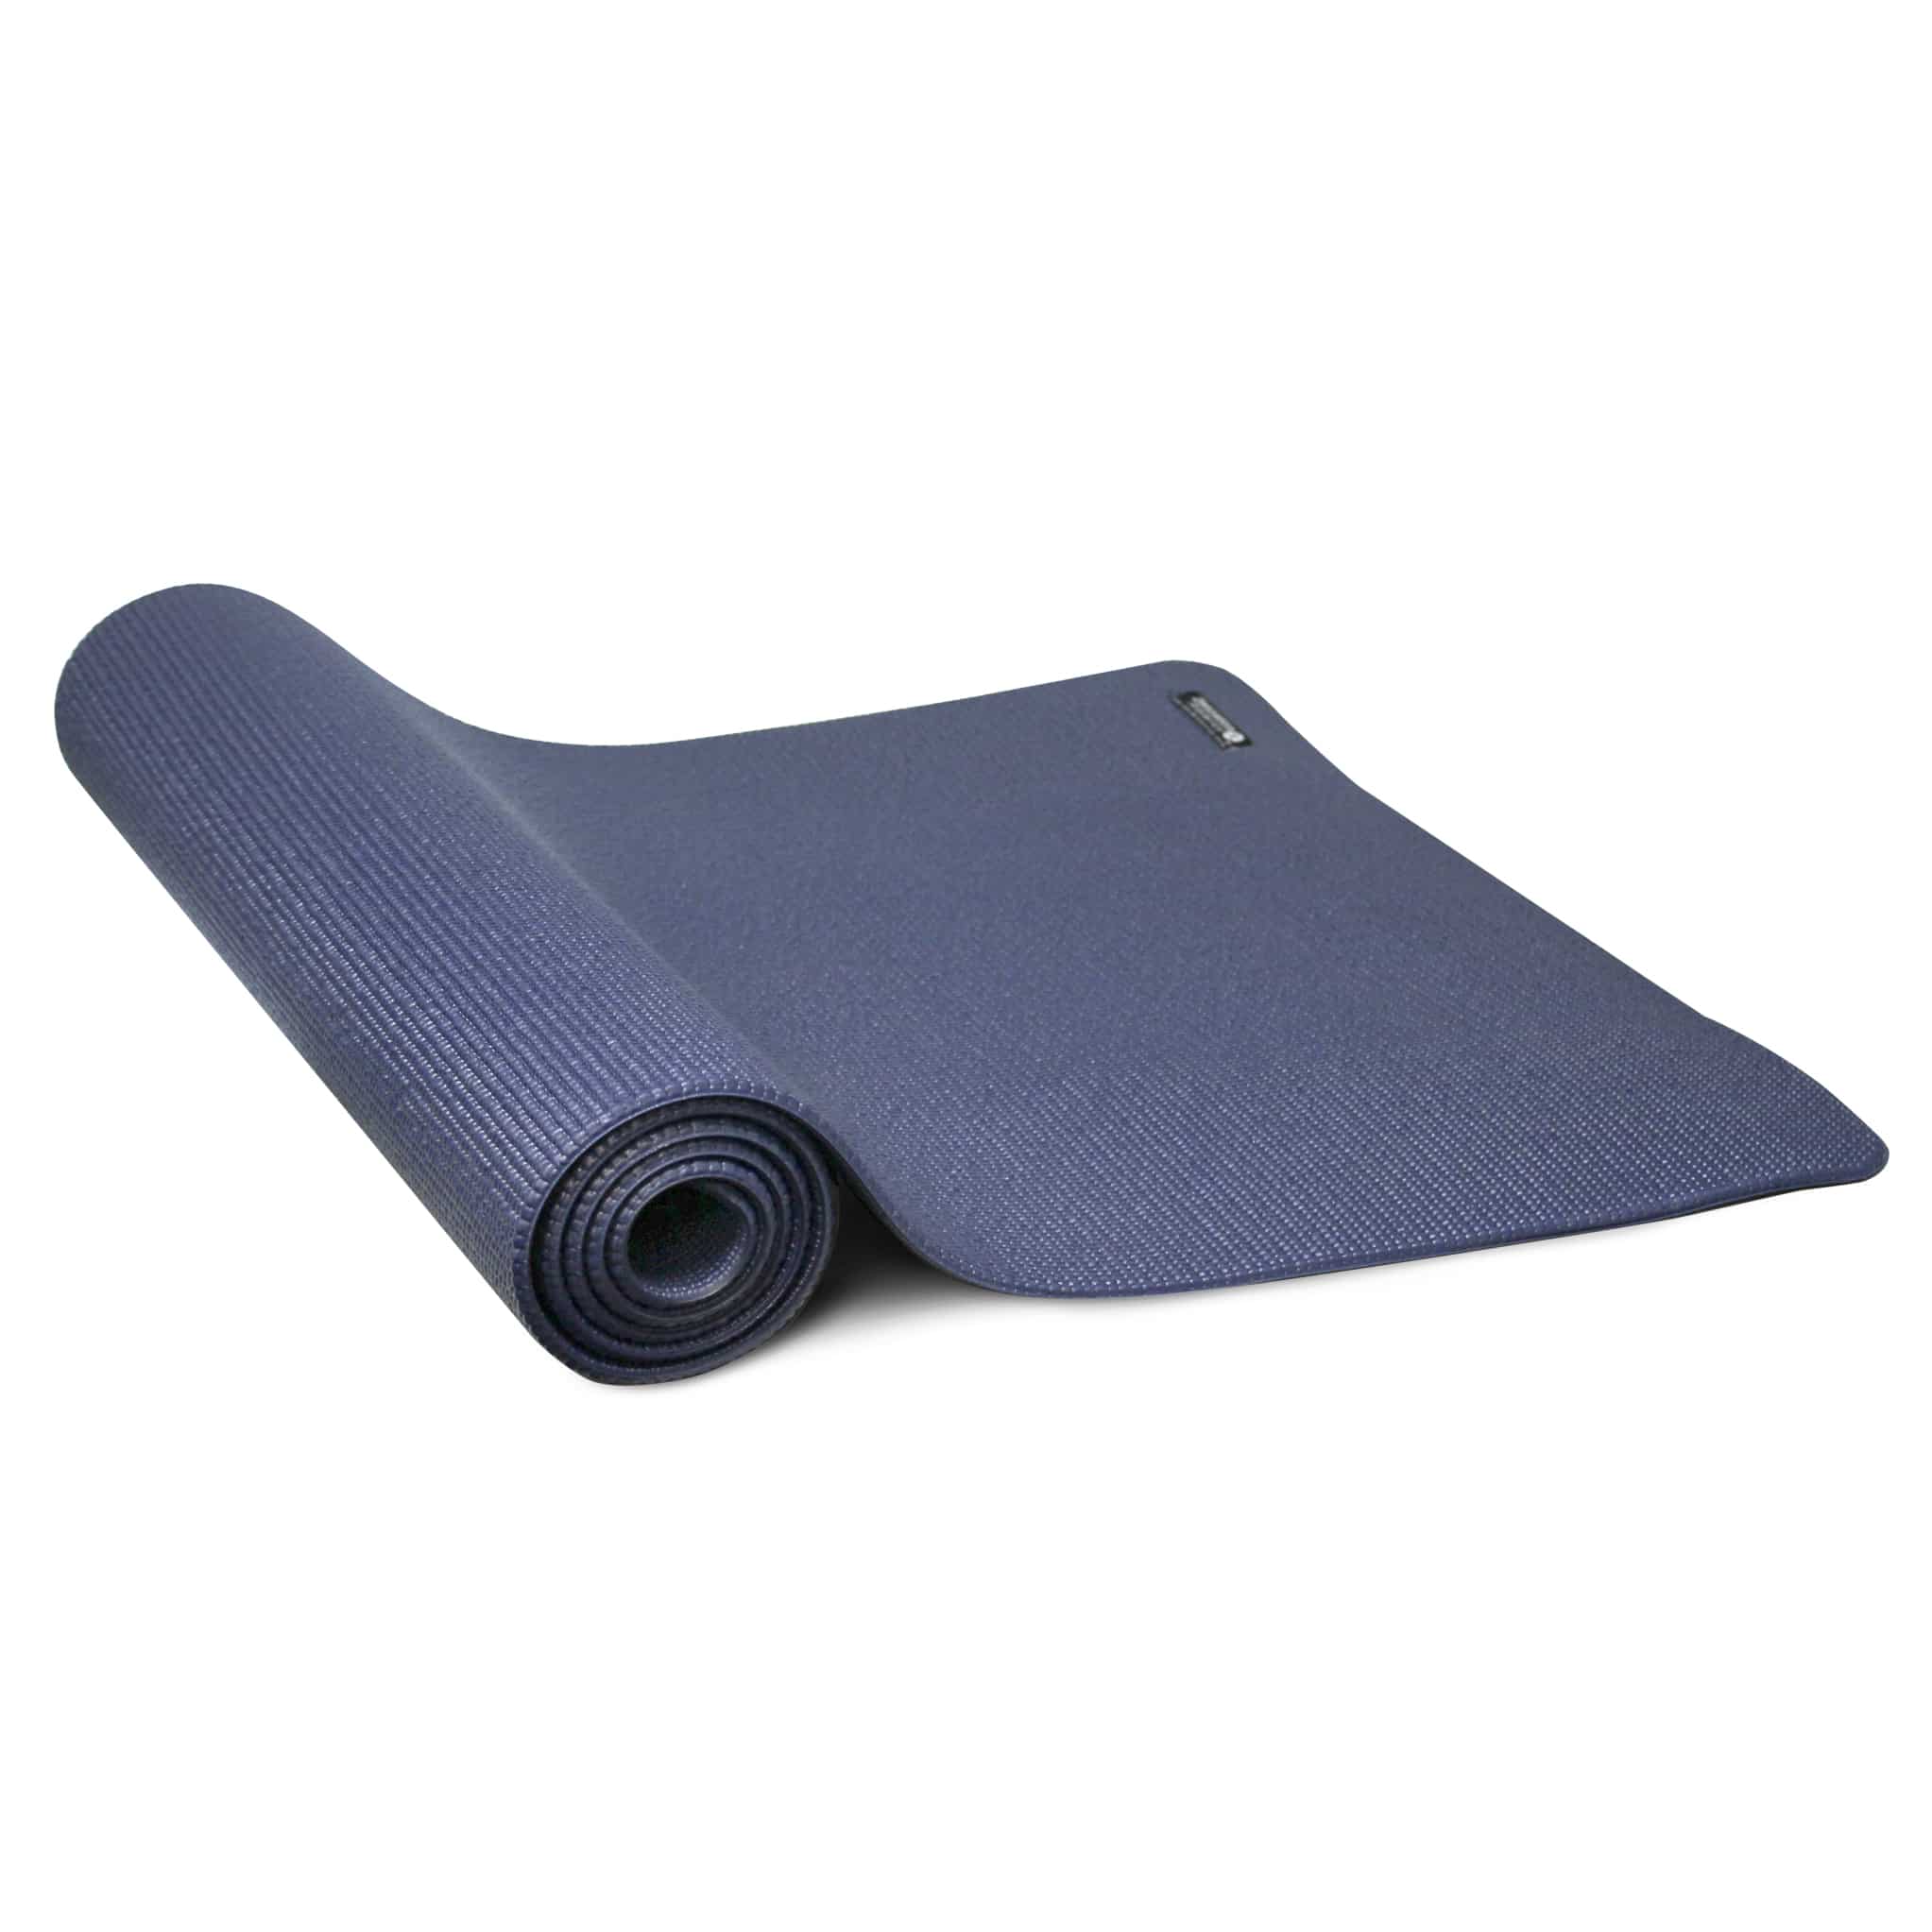 Zenzation Premium Sticky Non-Slip Pilate & Yoga Mat. Great for All Type of  Home Workout, Gym & Yoga Studio